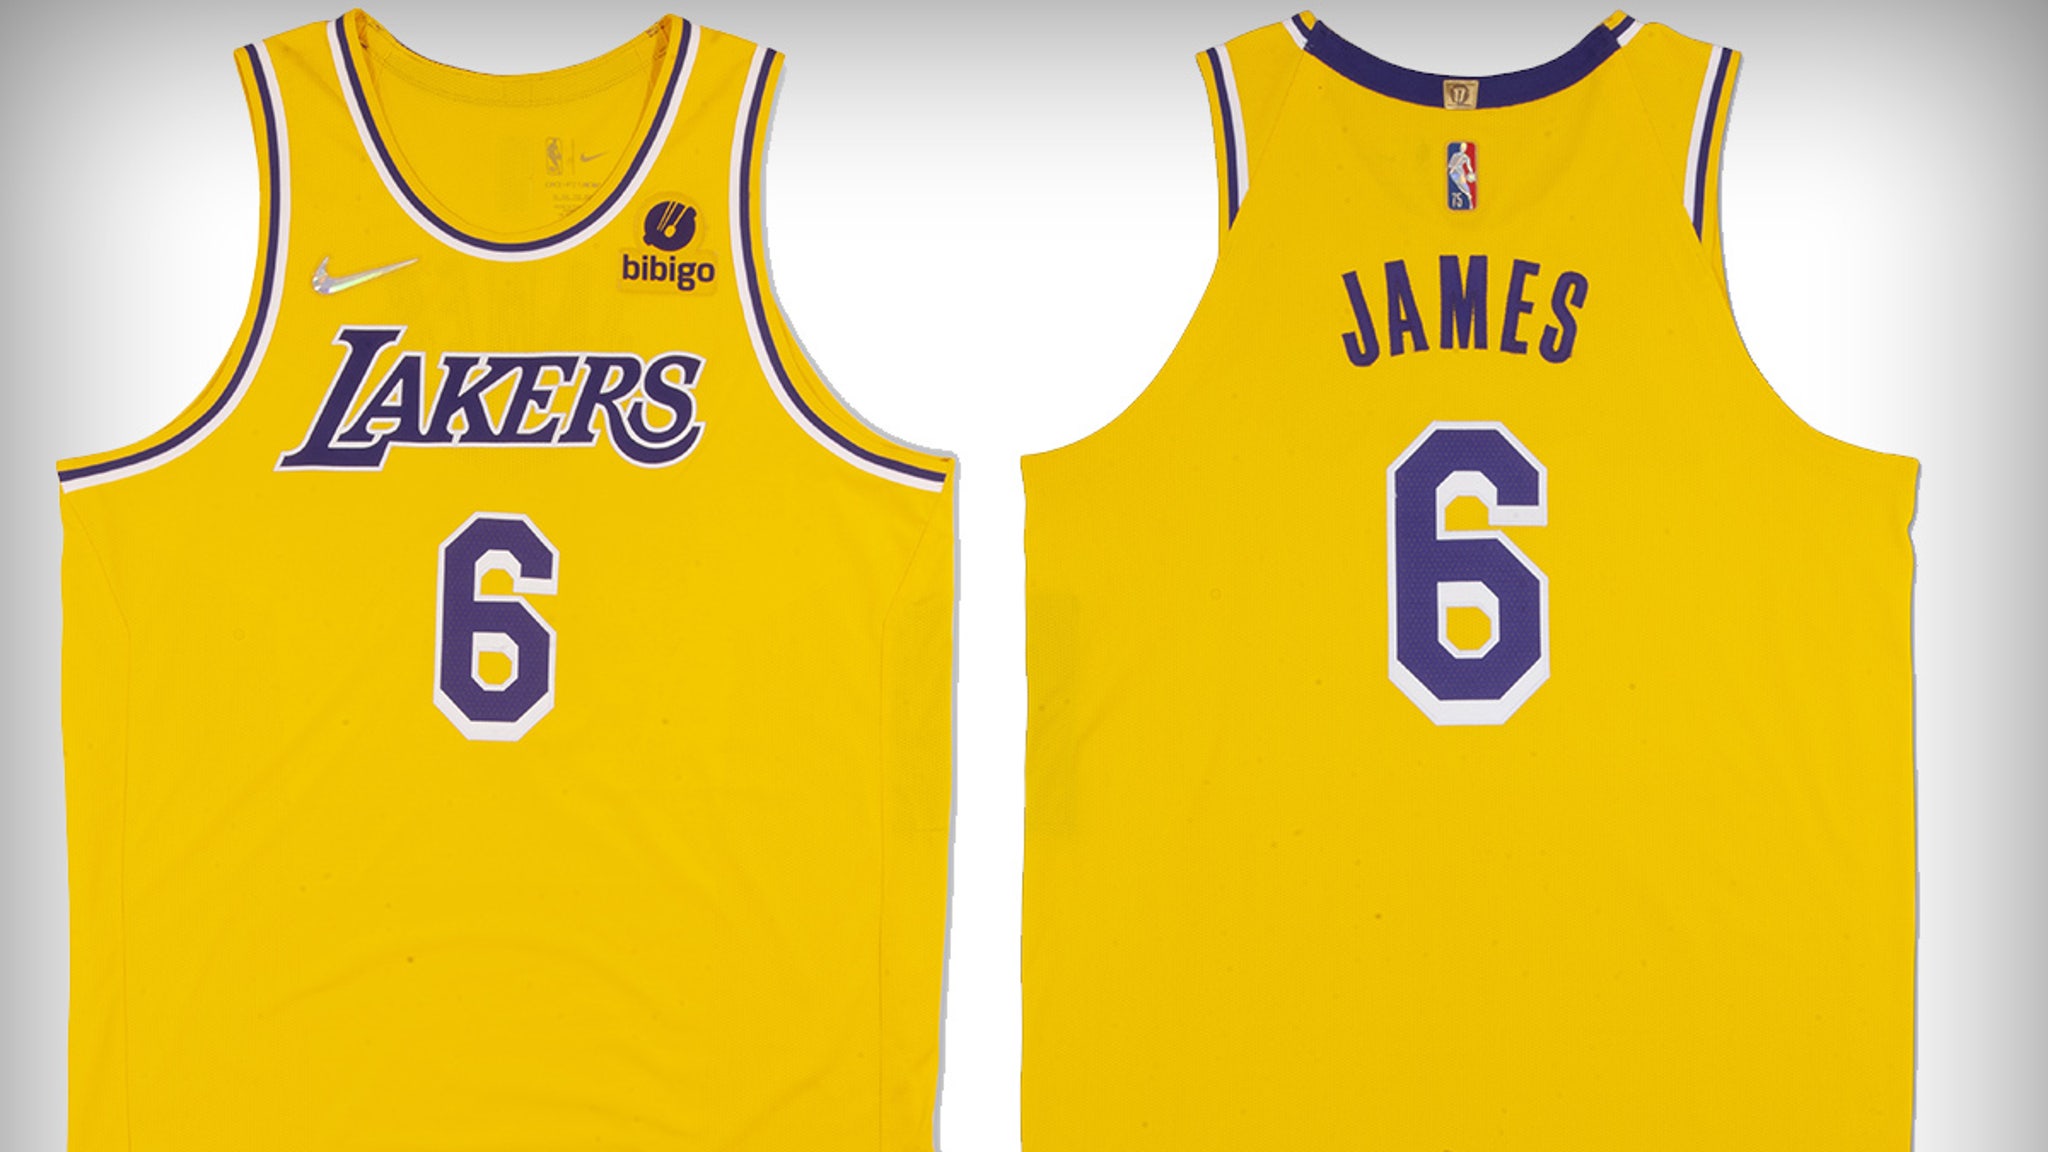 lakers 23 jersey history